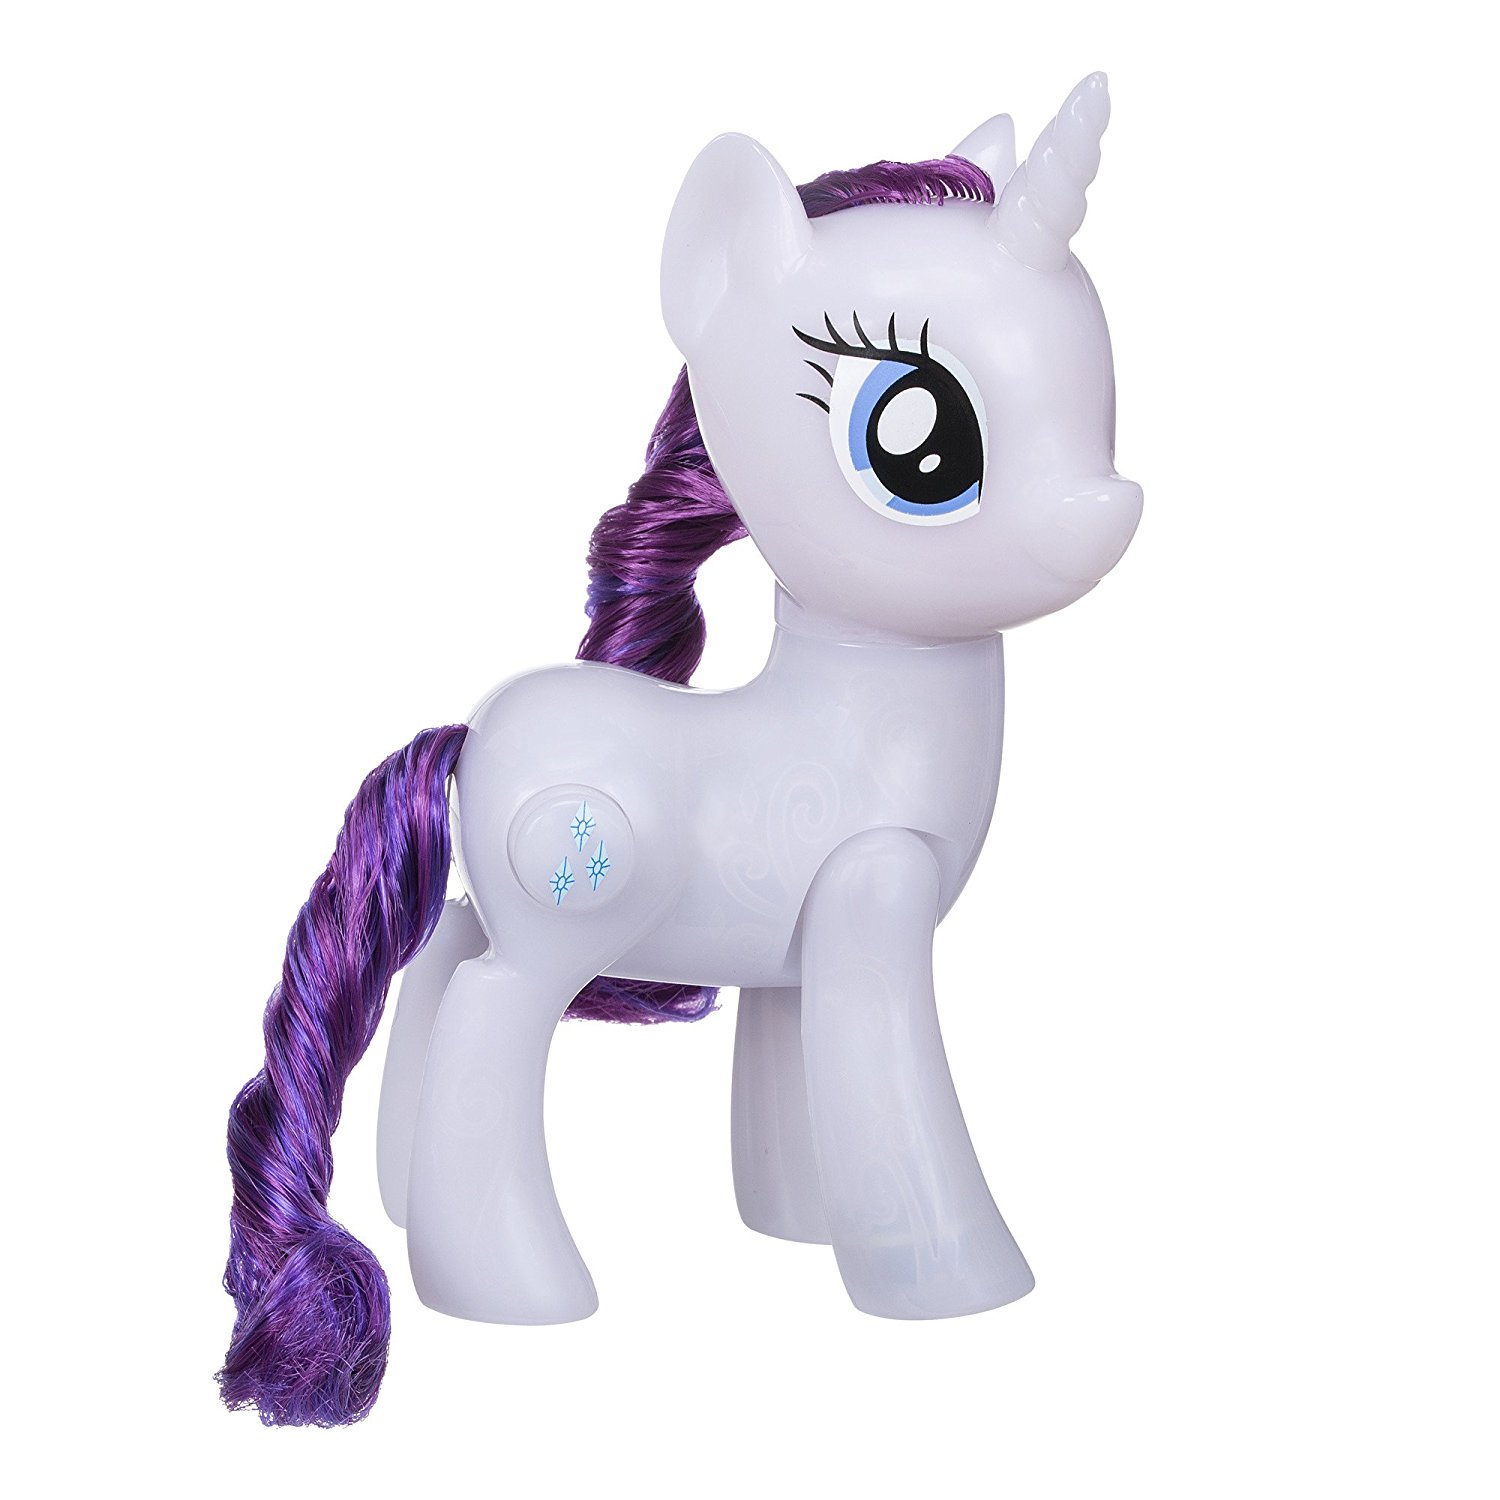 New My Little Pony The Movie Shining Friends Rarity Figure Available